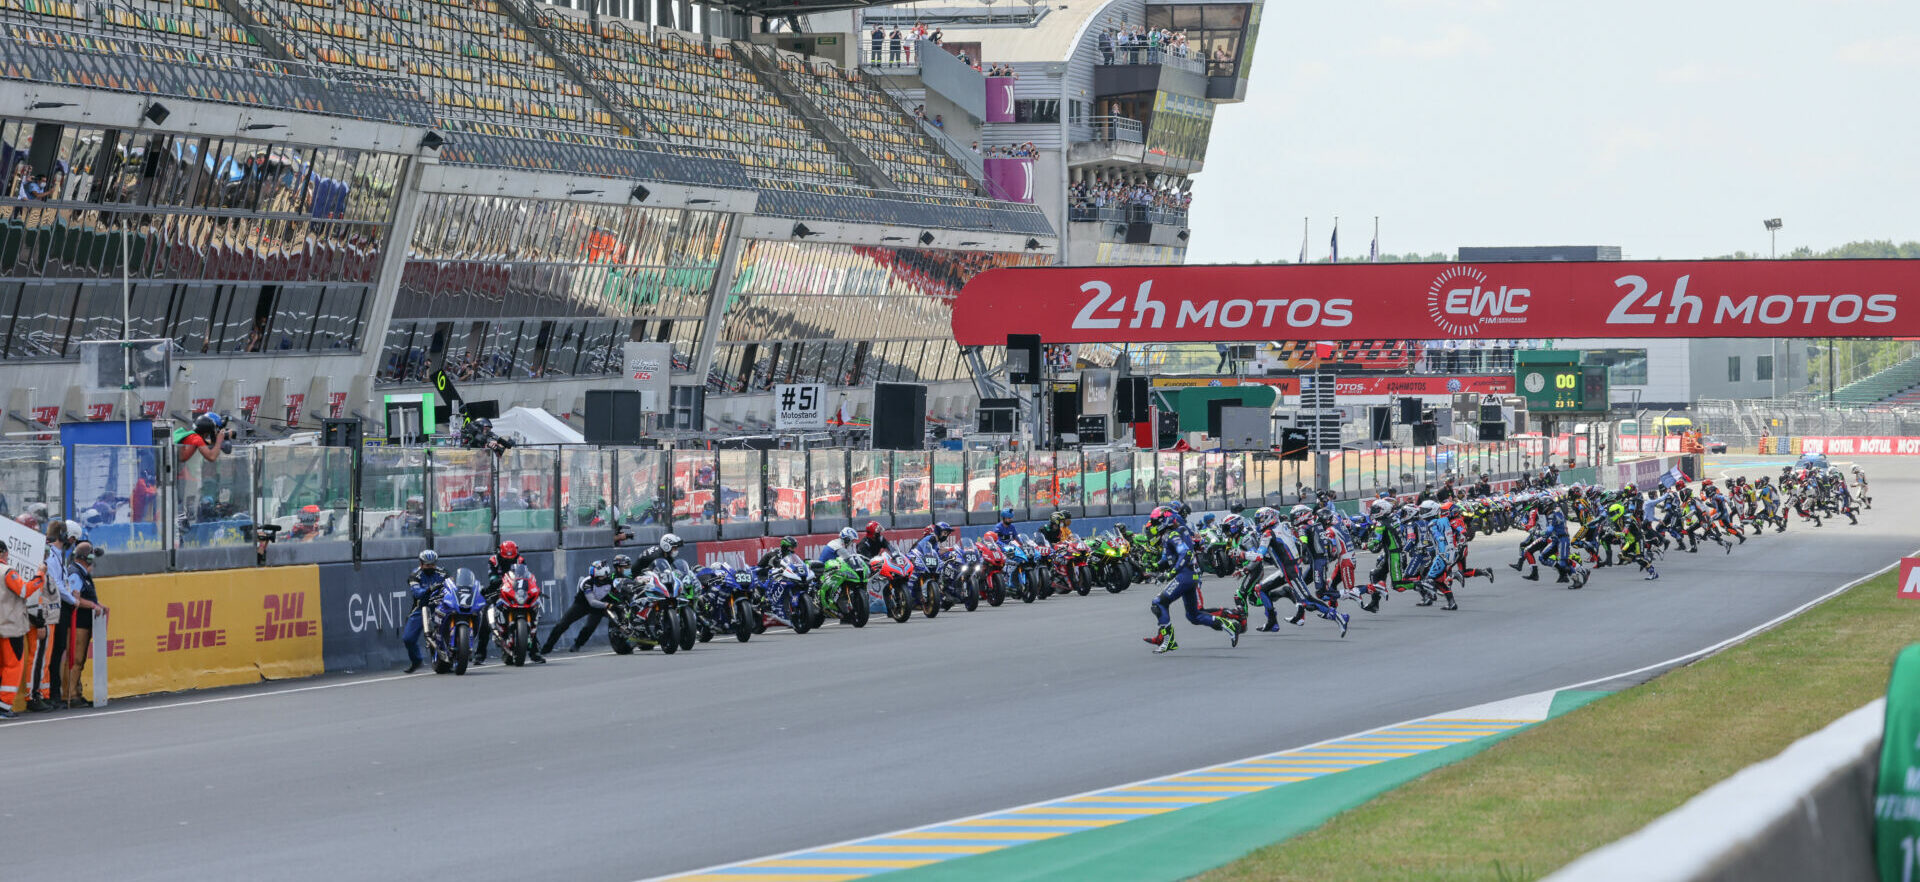 The start of the 24 Hours of Le Mans in 2021. Photo courtesy Eurosport Events.